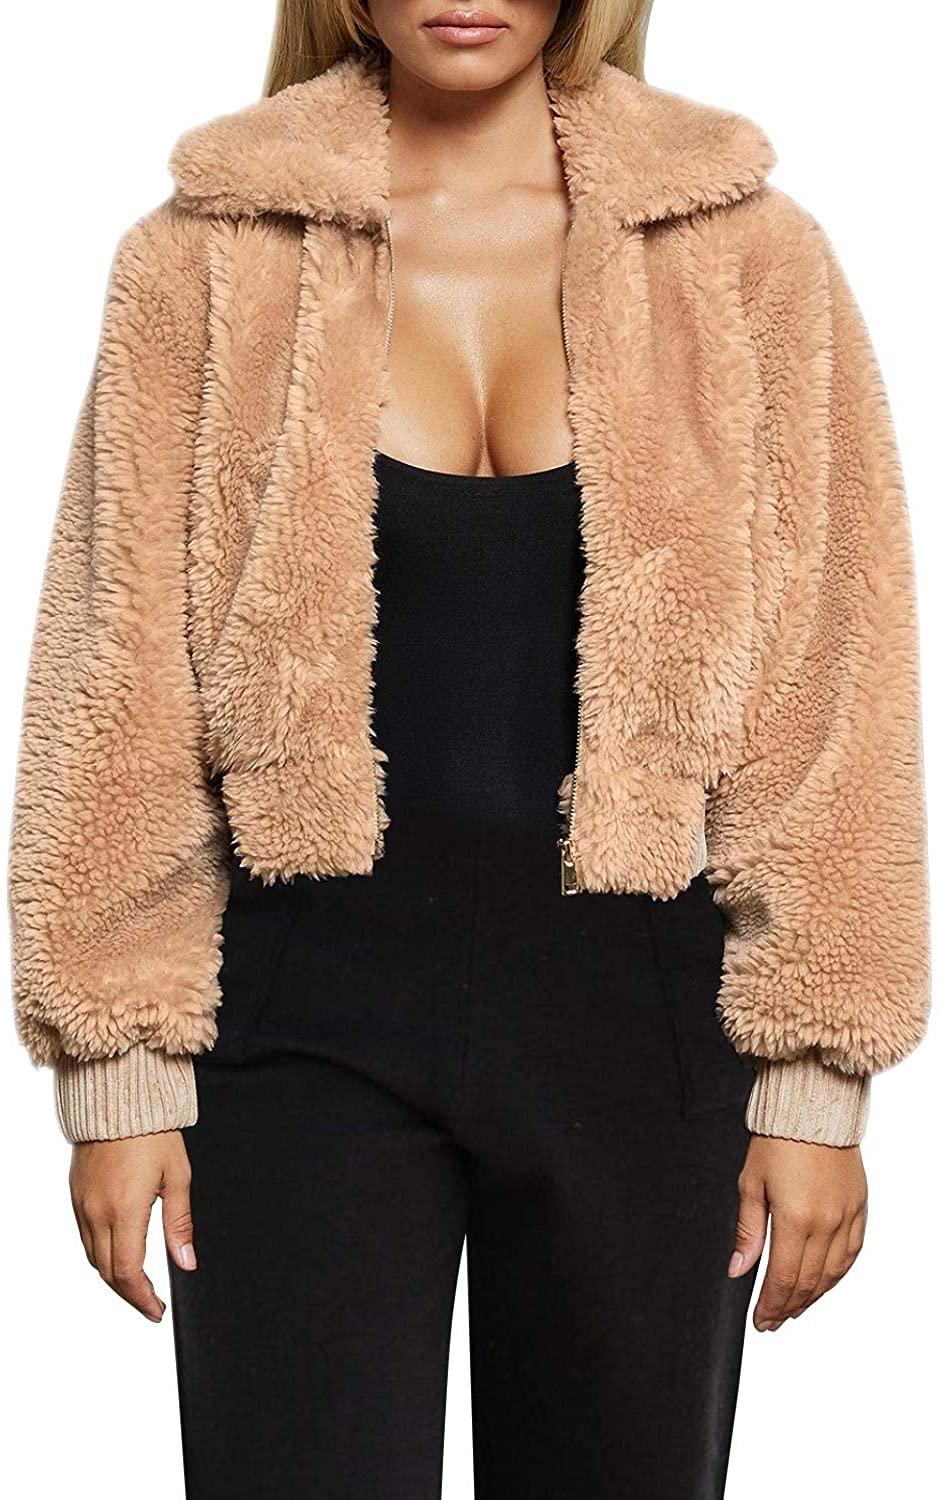 Warm Winter Cropped Faux Fur Zip-Up Khaki Jacket with Pockets